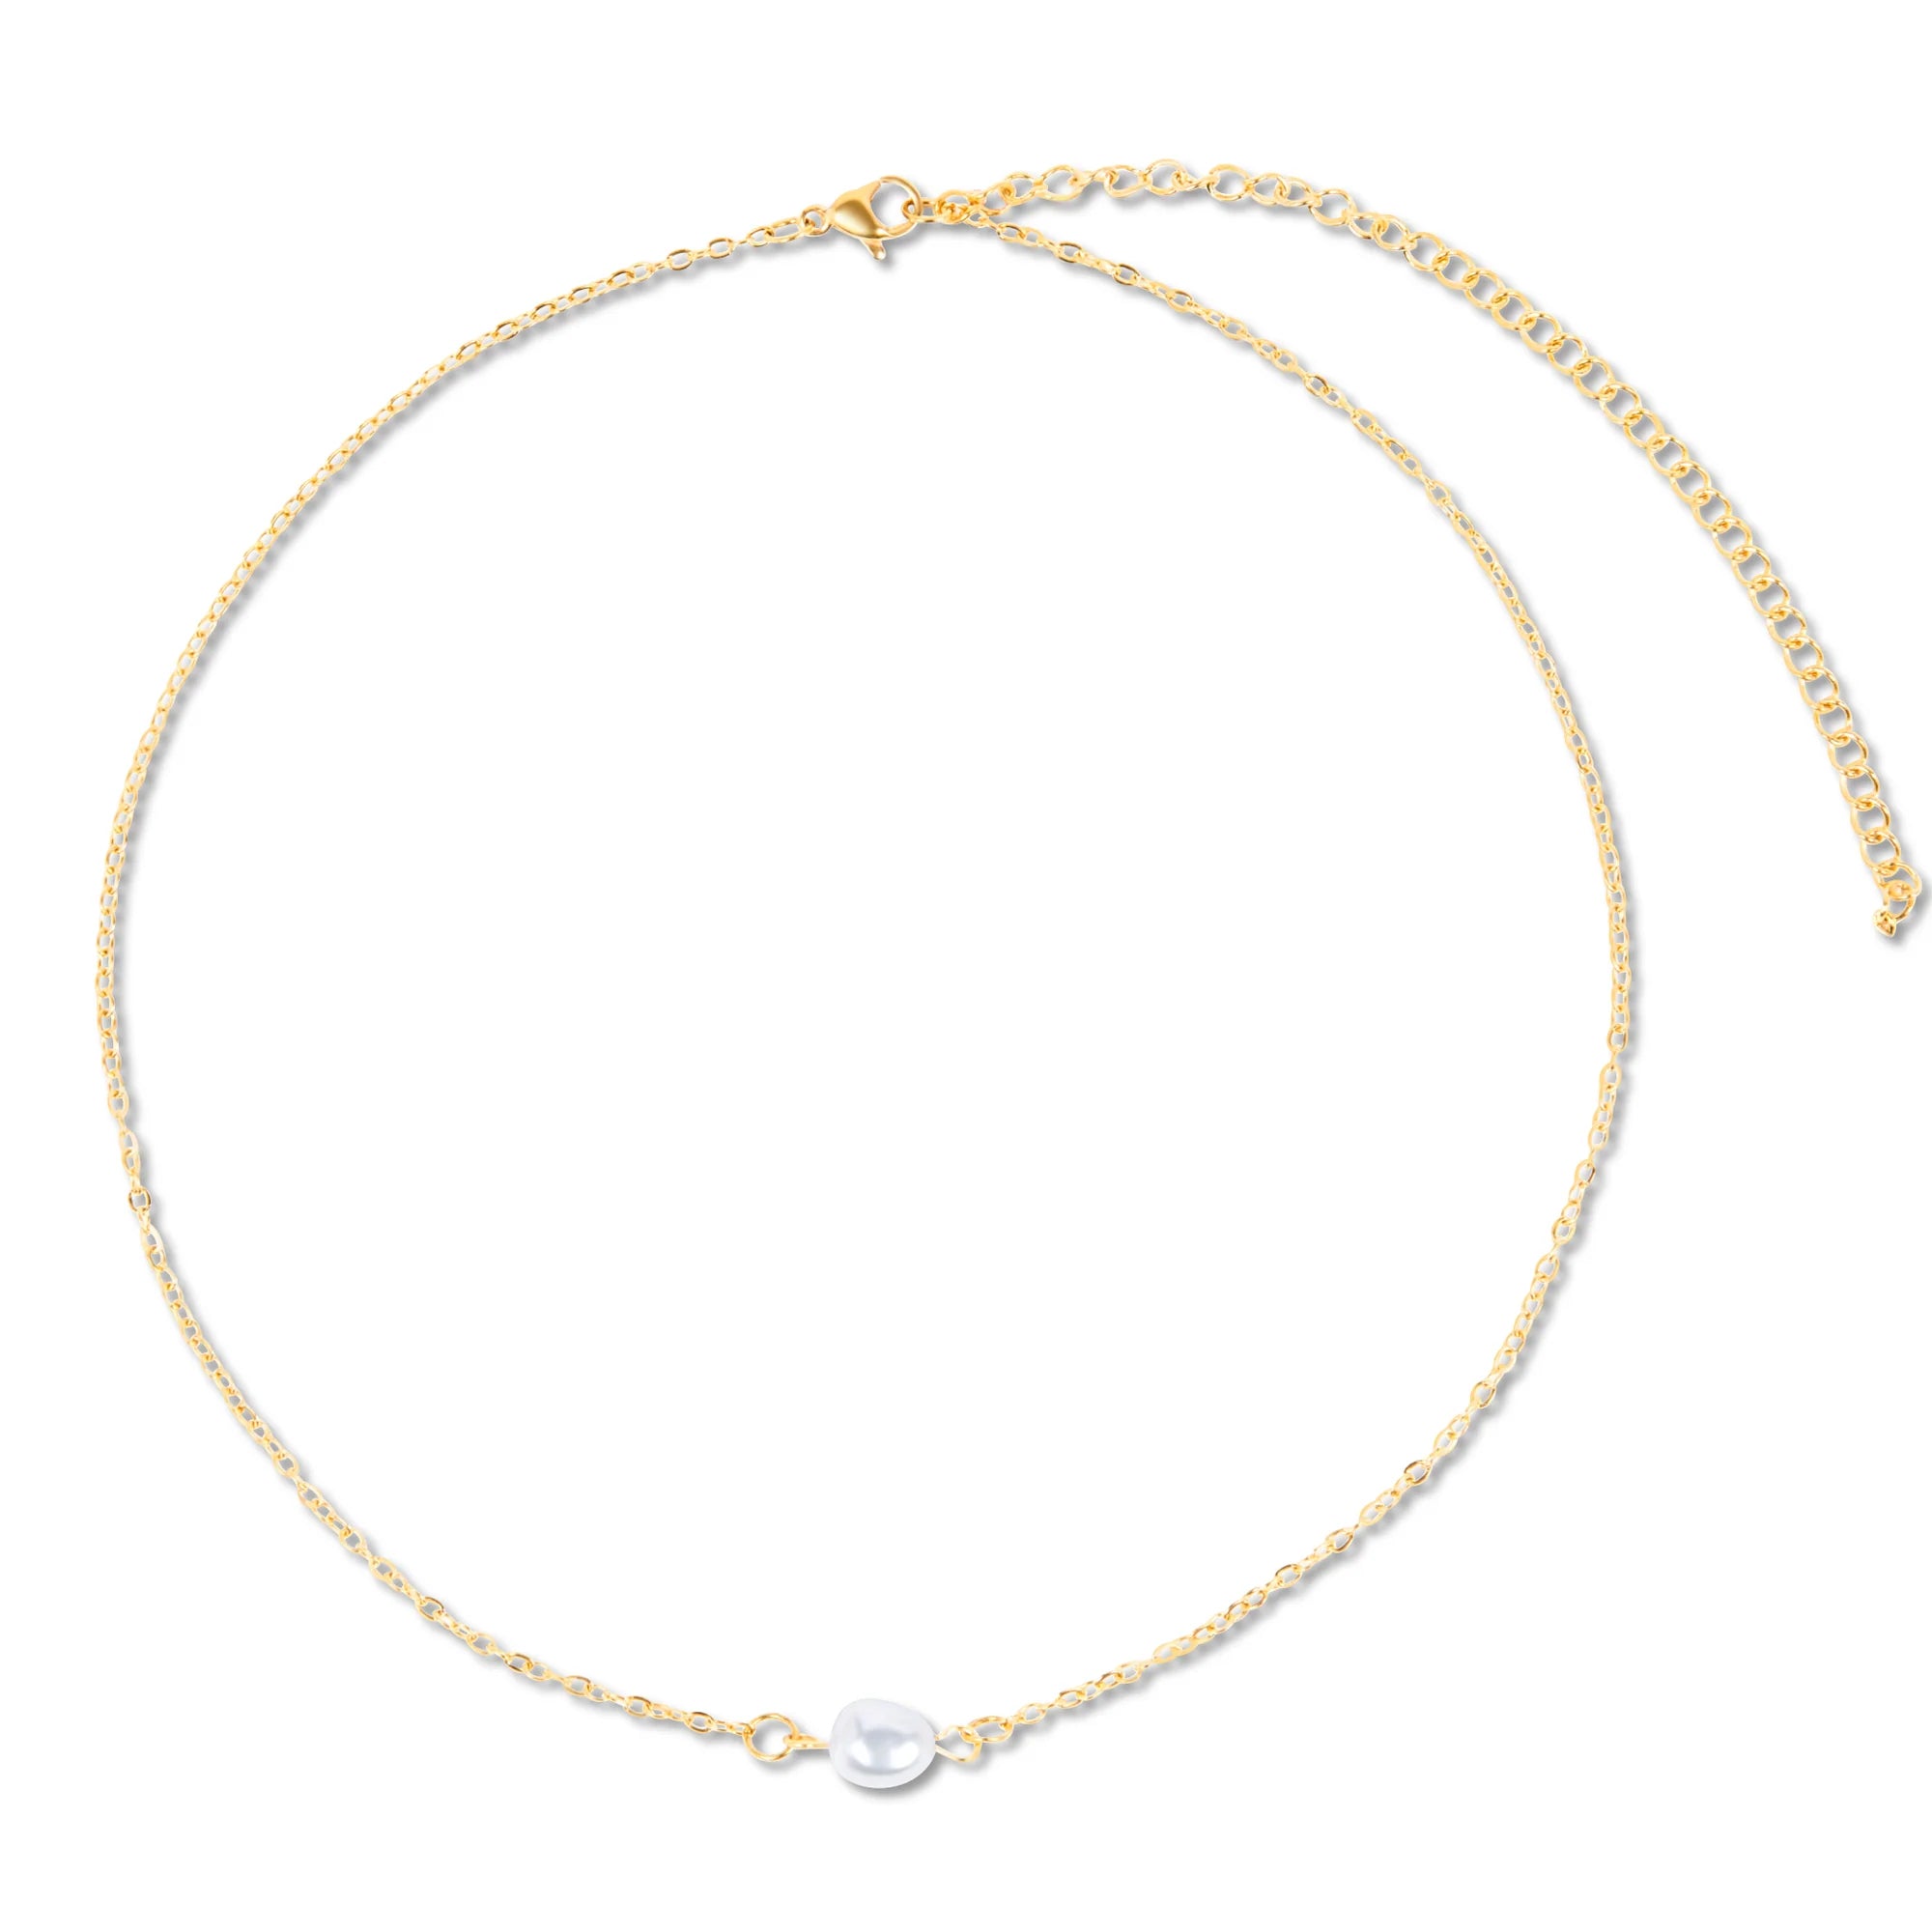 Ellie Vail Shayla Dainty Pearl Choker Necklace